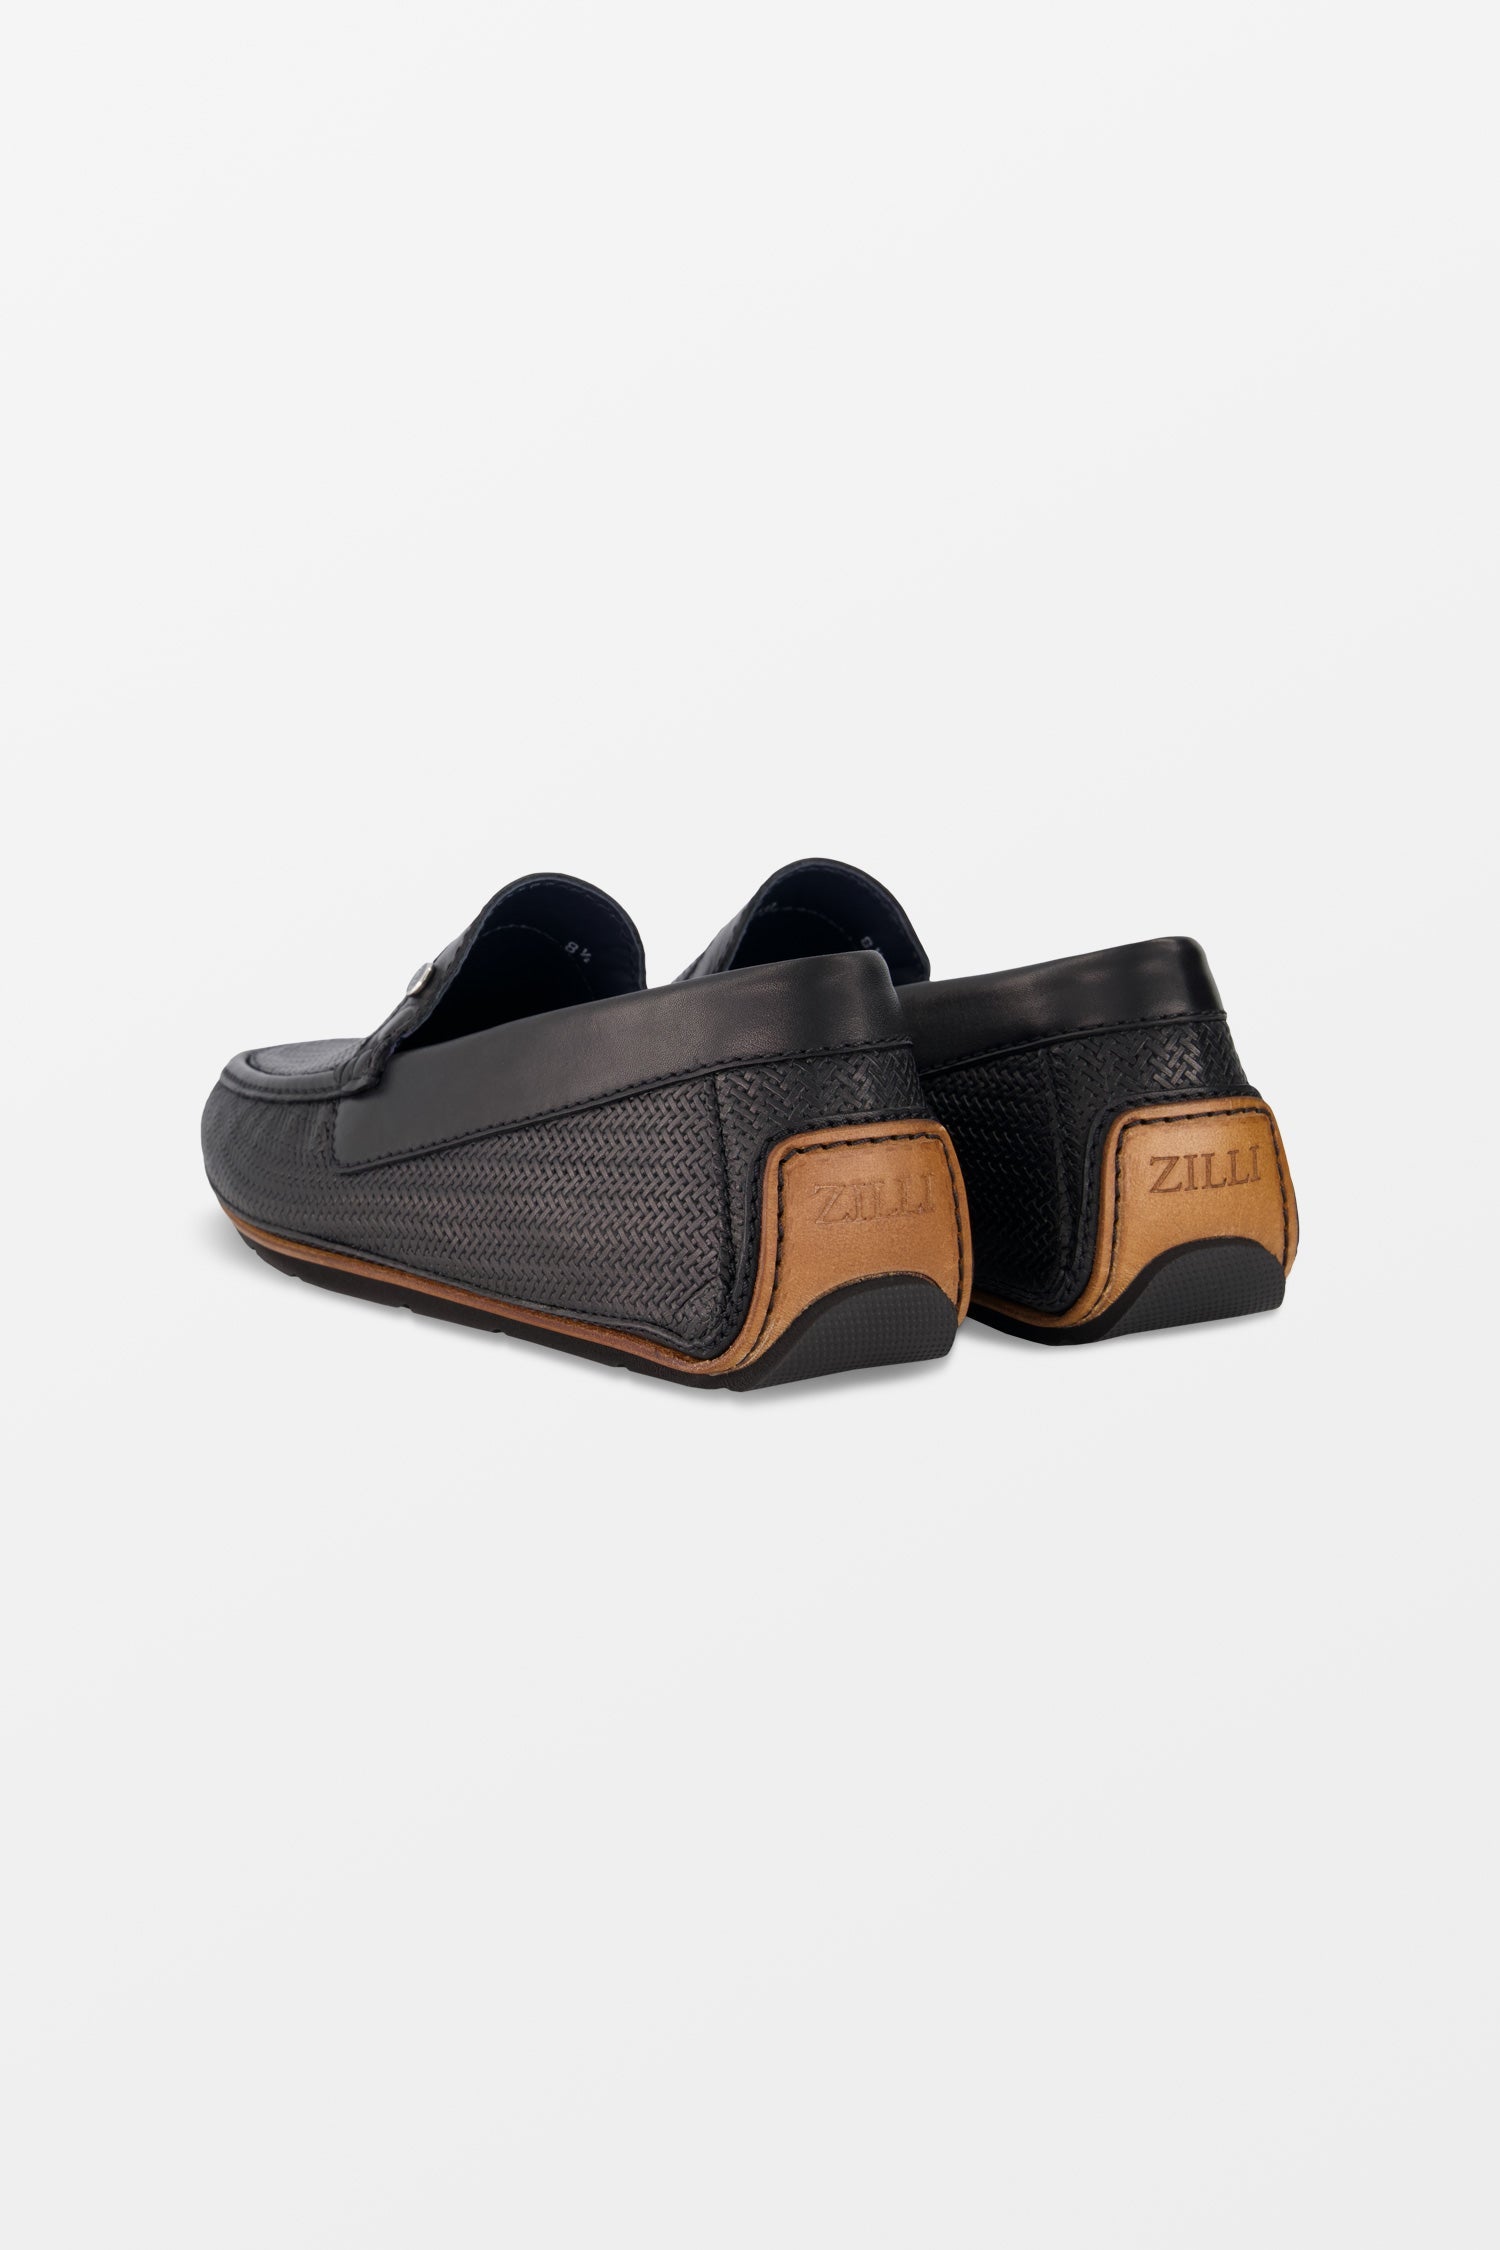 Zilli Black Casual Driving Moccasins